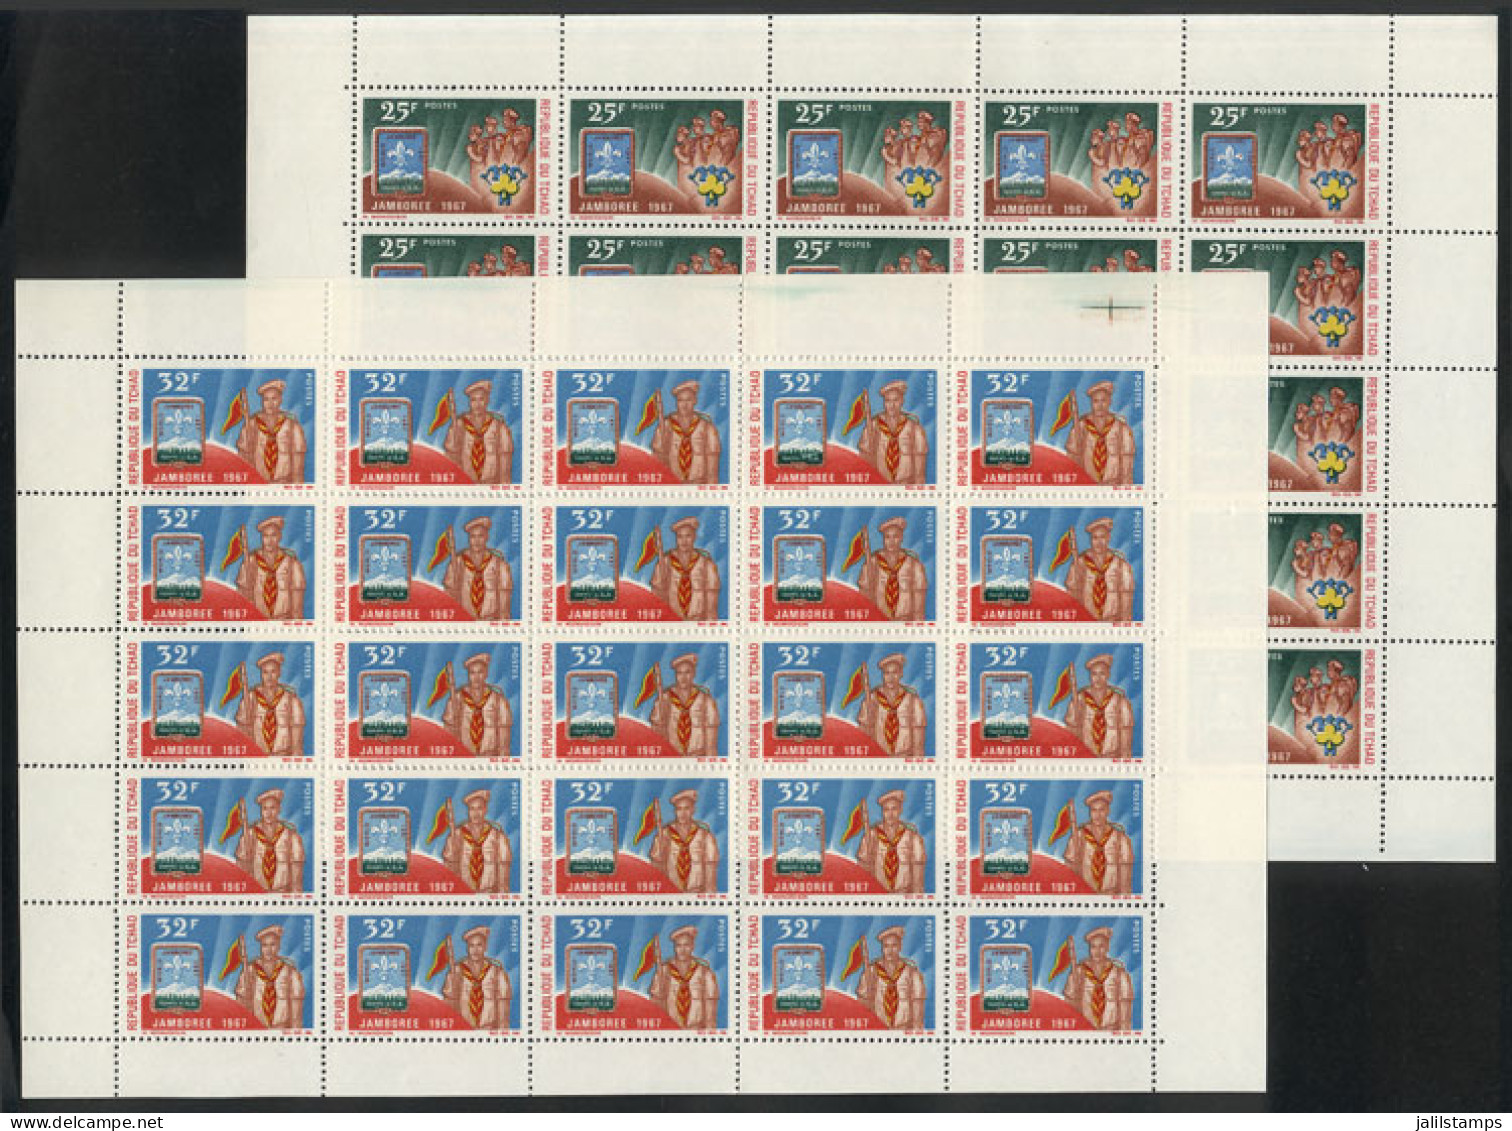 CHAD: Sc.144/145, 1967 Scouts, Cmpl. Set Of 2 Values In Sheets Of 25, MNH, VF Quality! - Chad (1960-...)